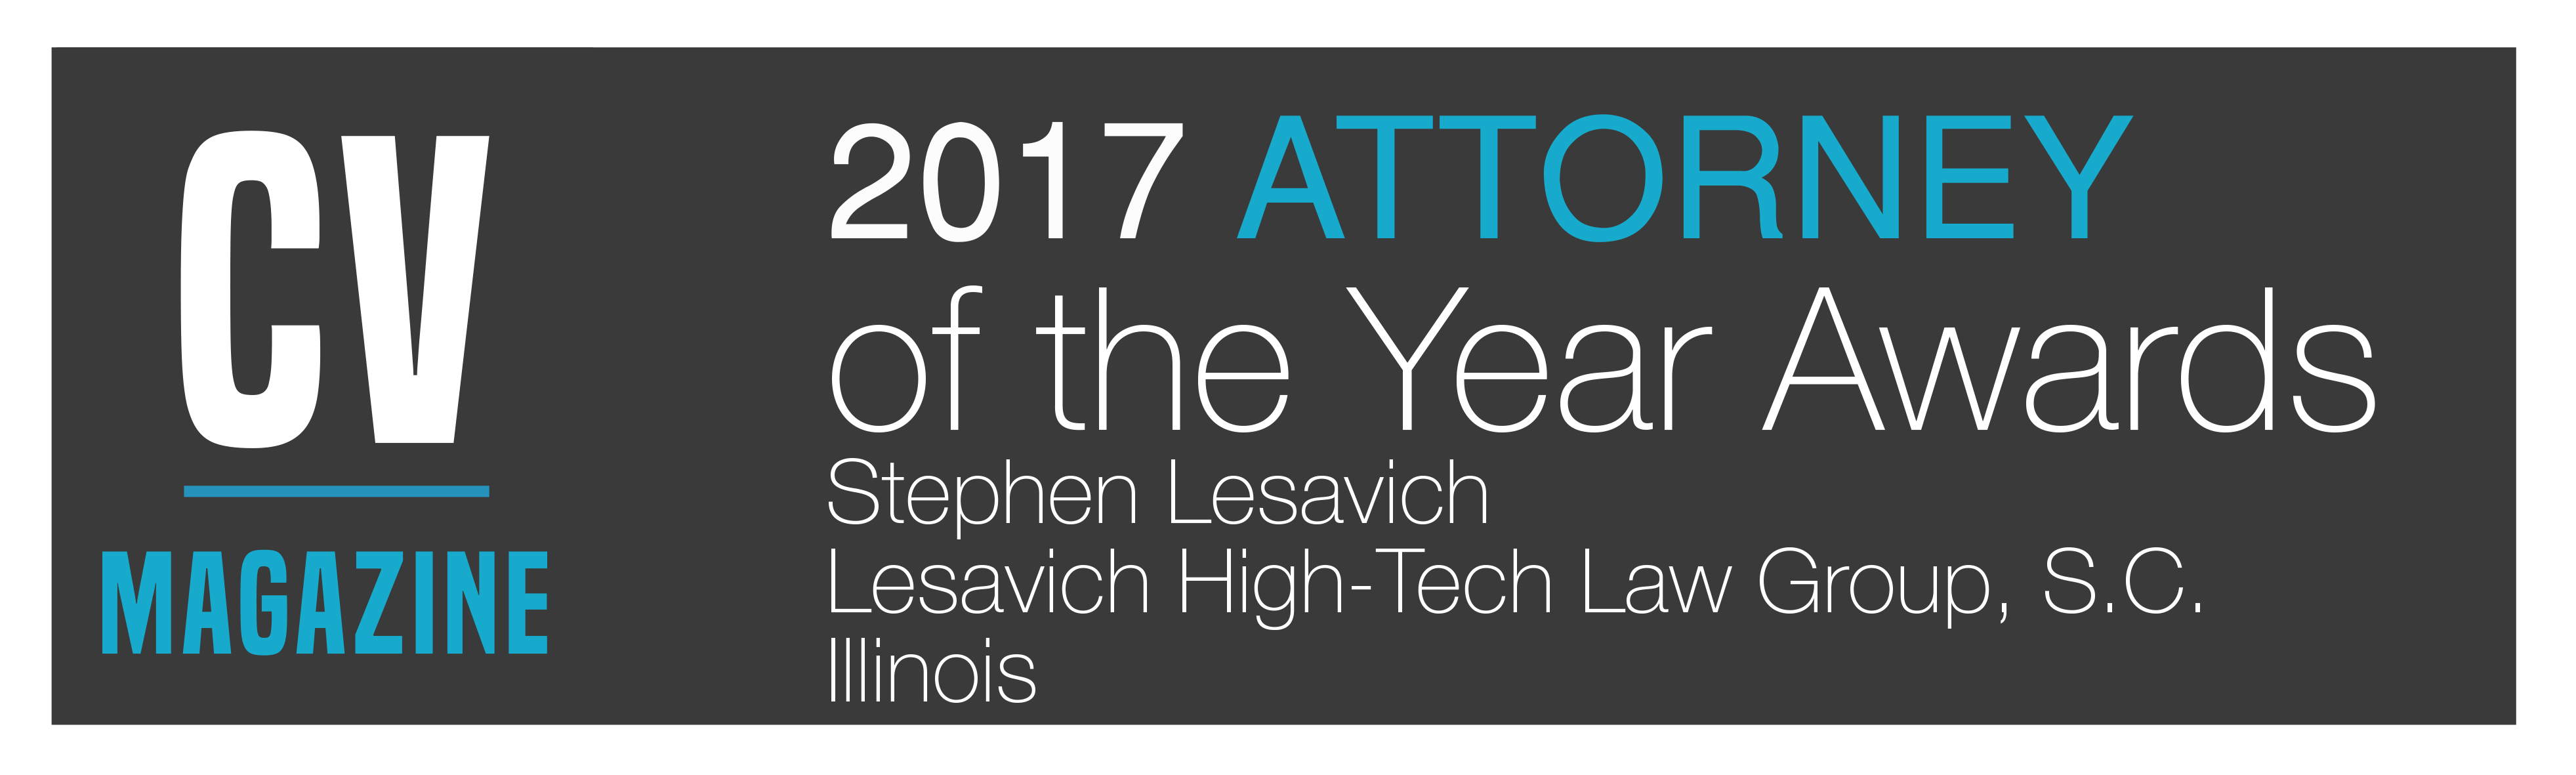 Lesavich High-Tech Law Group S.C.-Attorney of the Year Awards (